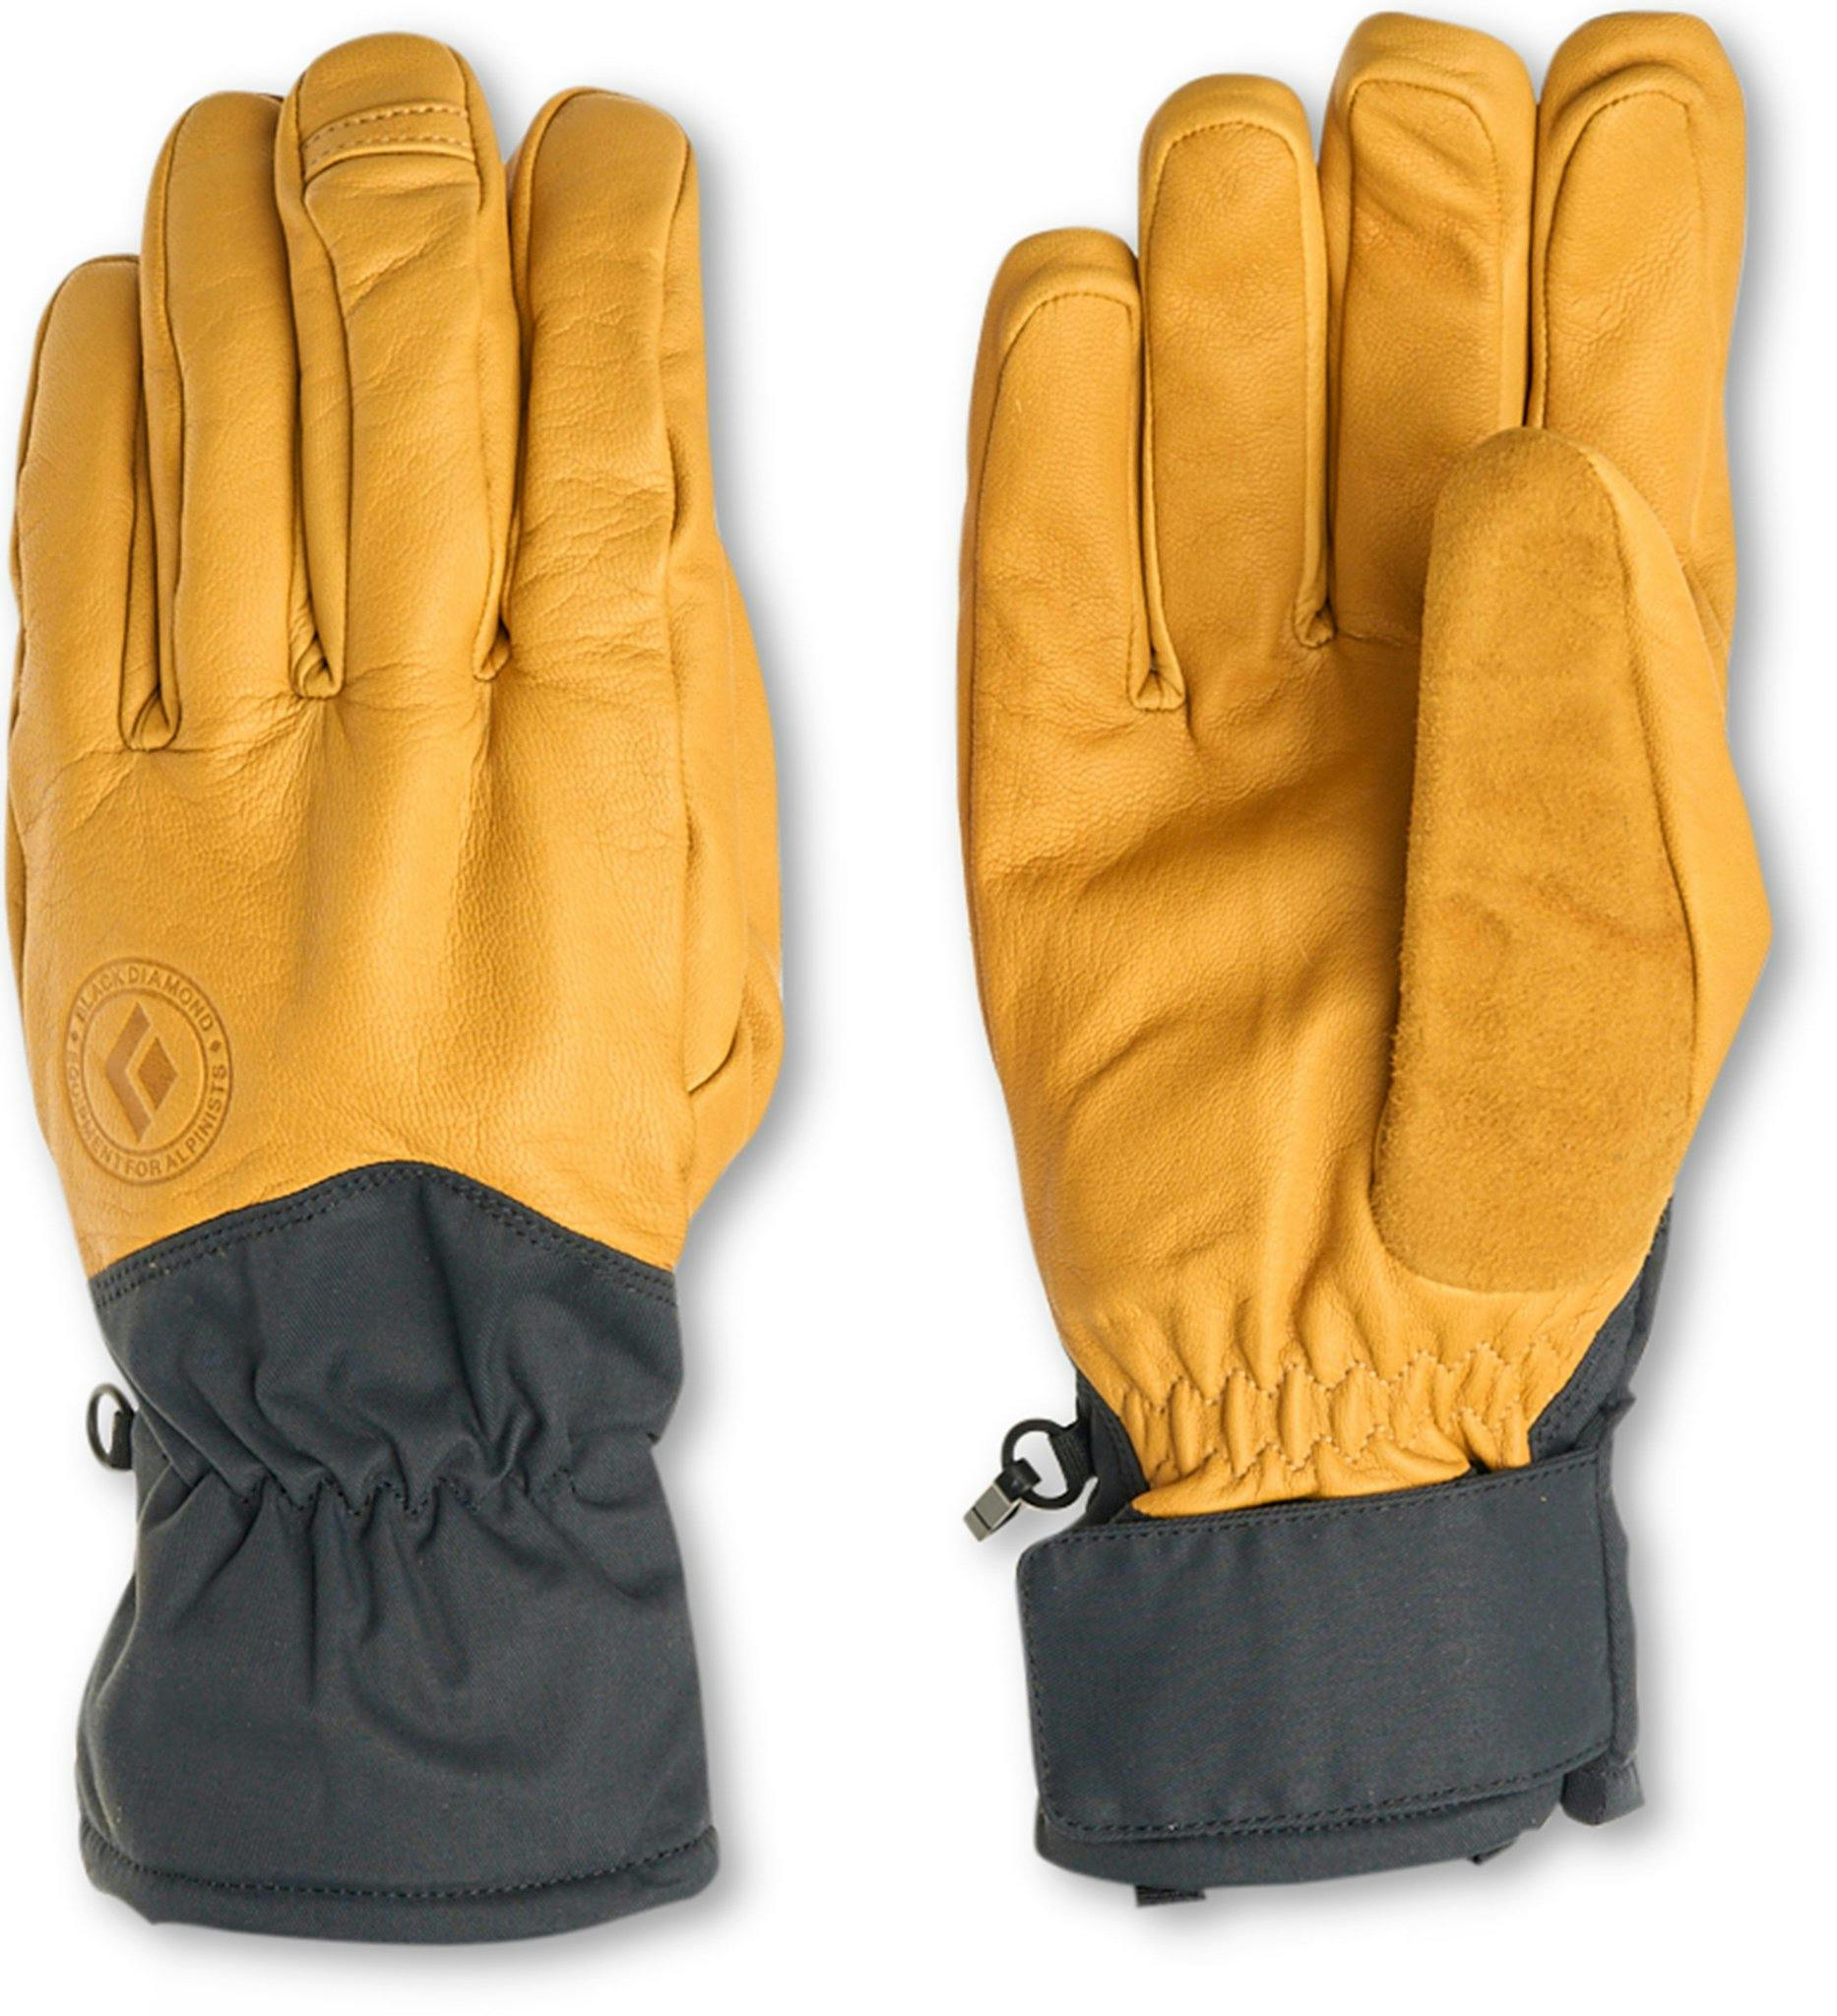 Product image for Tour Gloves